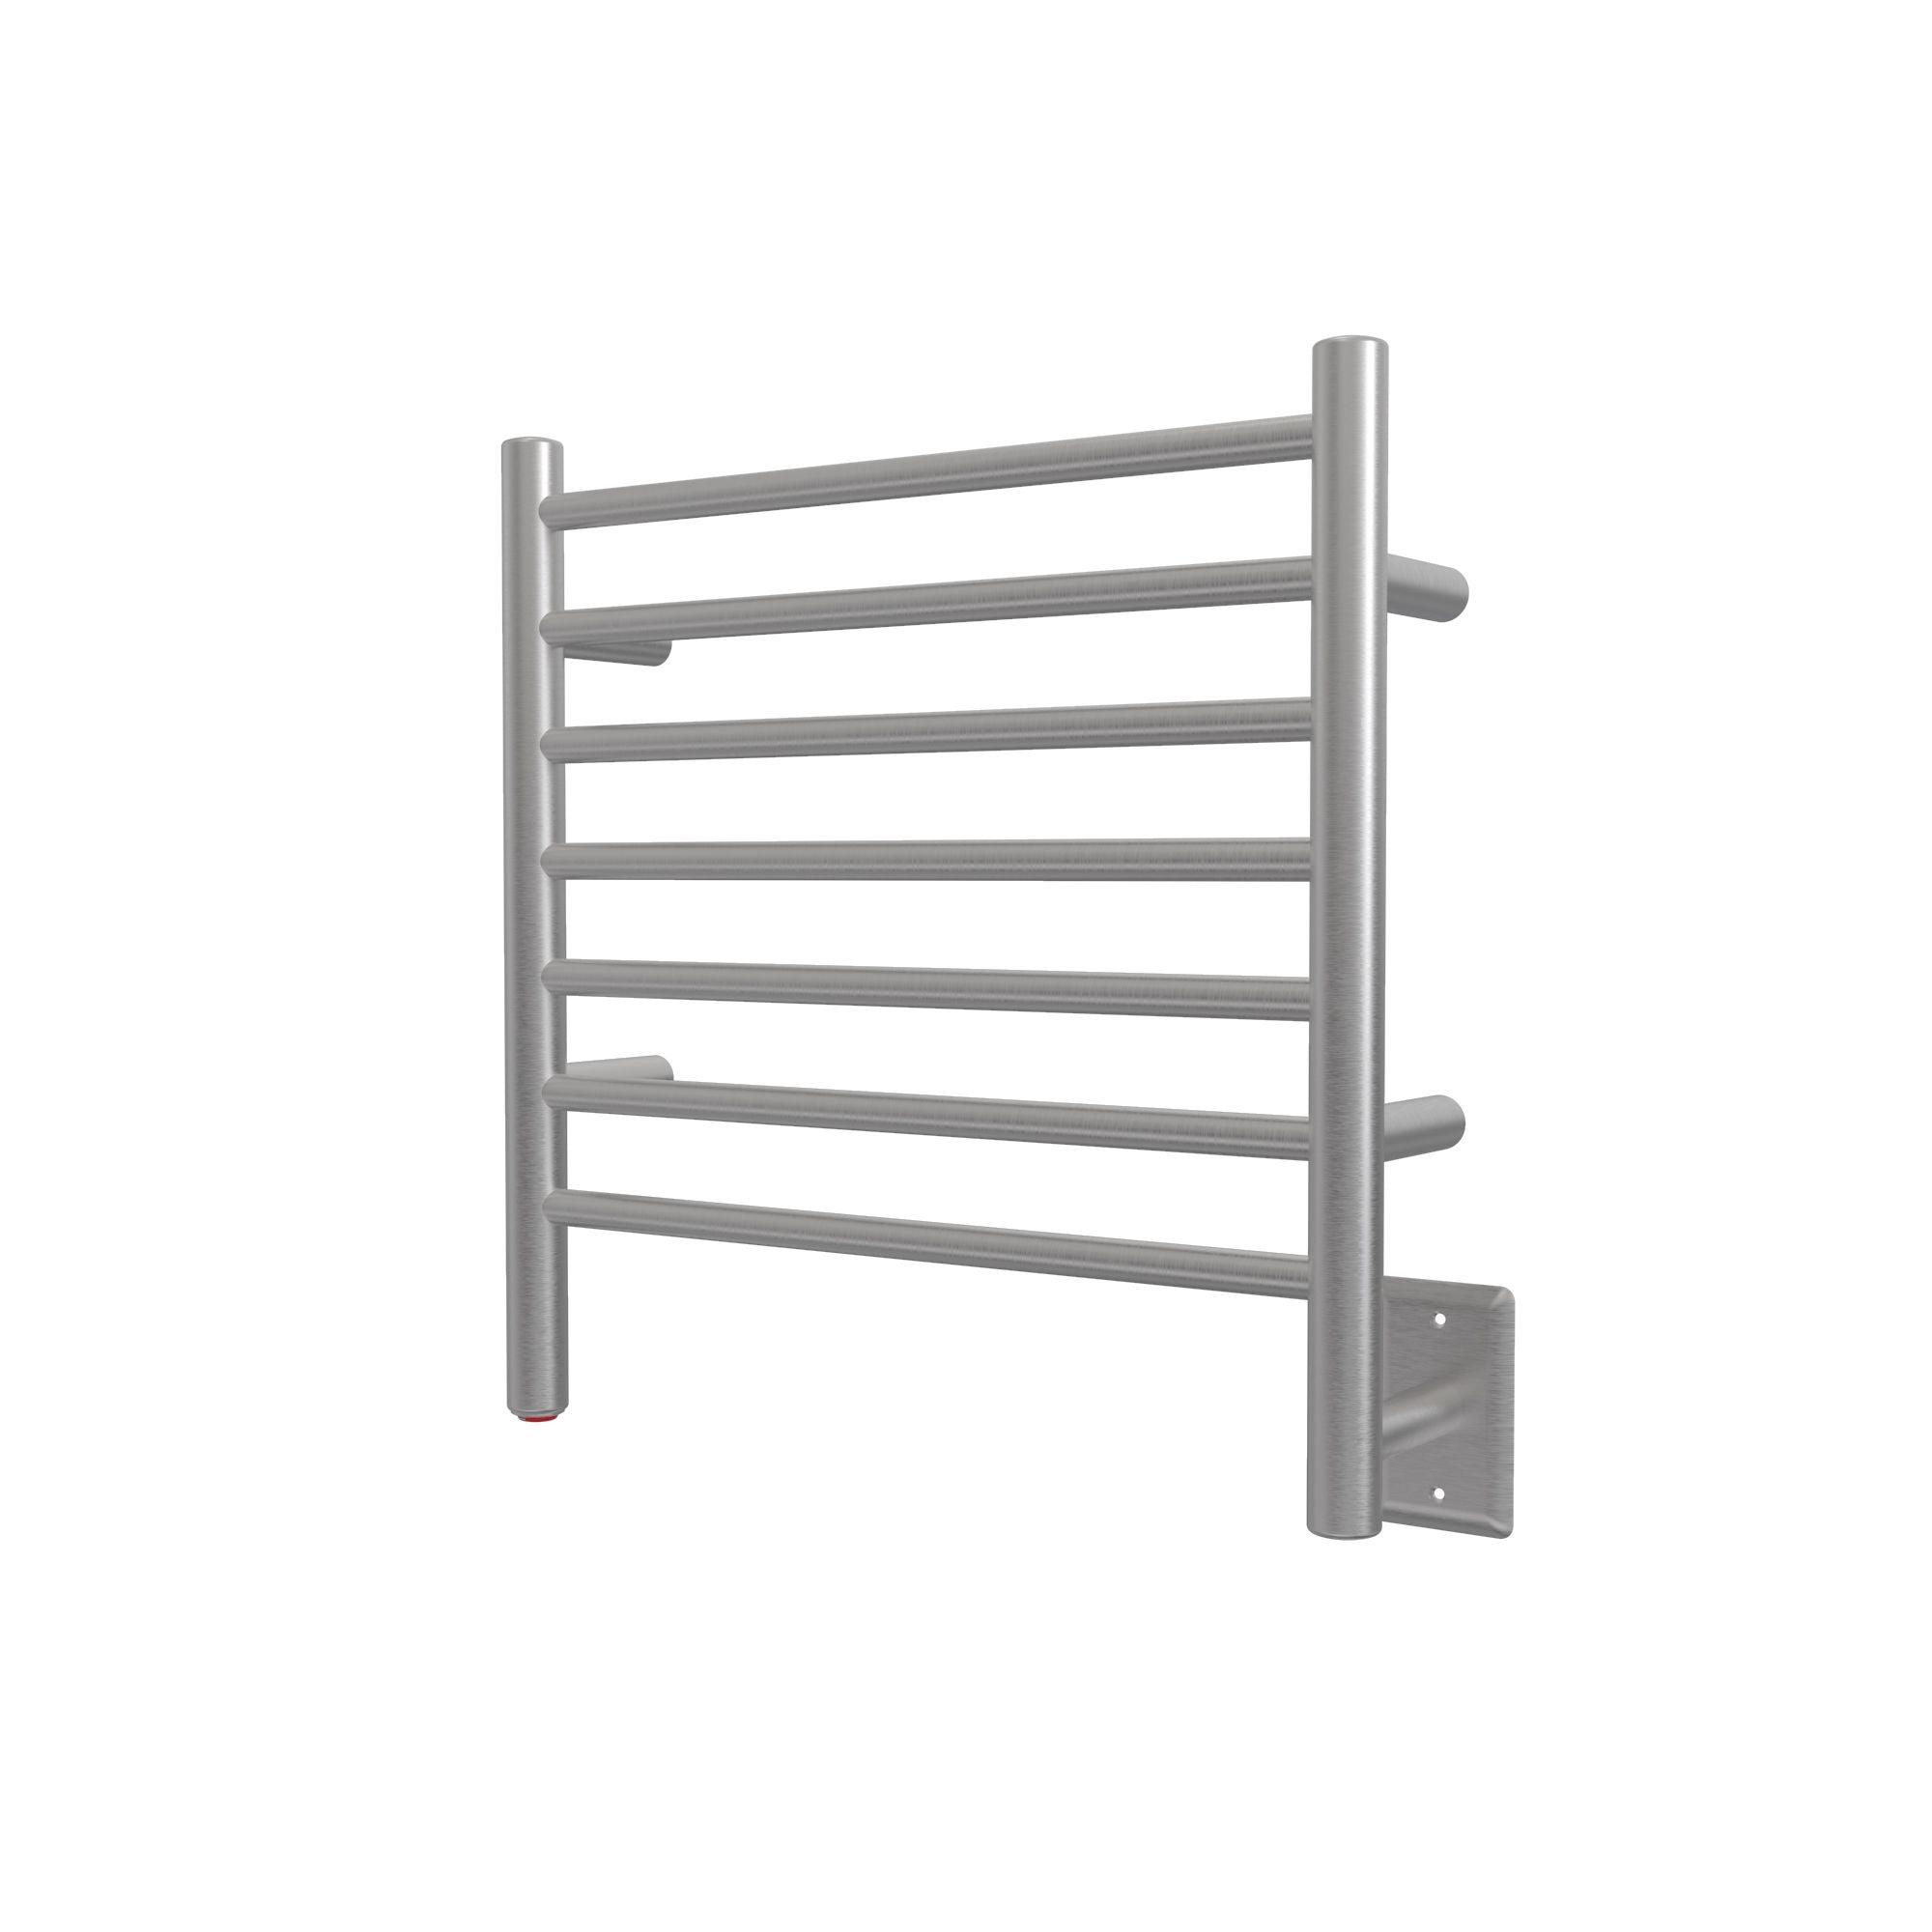 The Amba Radiant Small Straight Wall Mounted Electric Towel Warmer: A  Must-Have for Every Bathroom